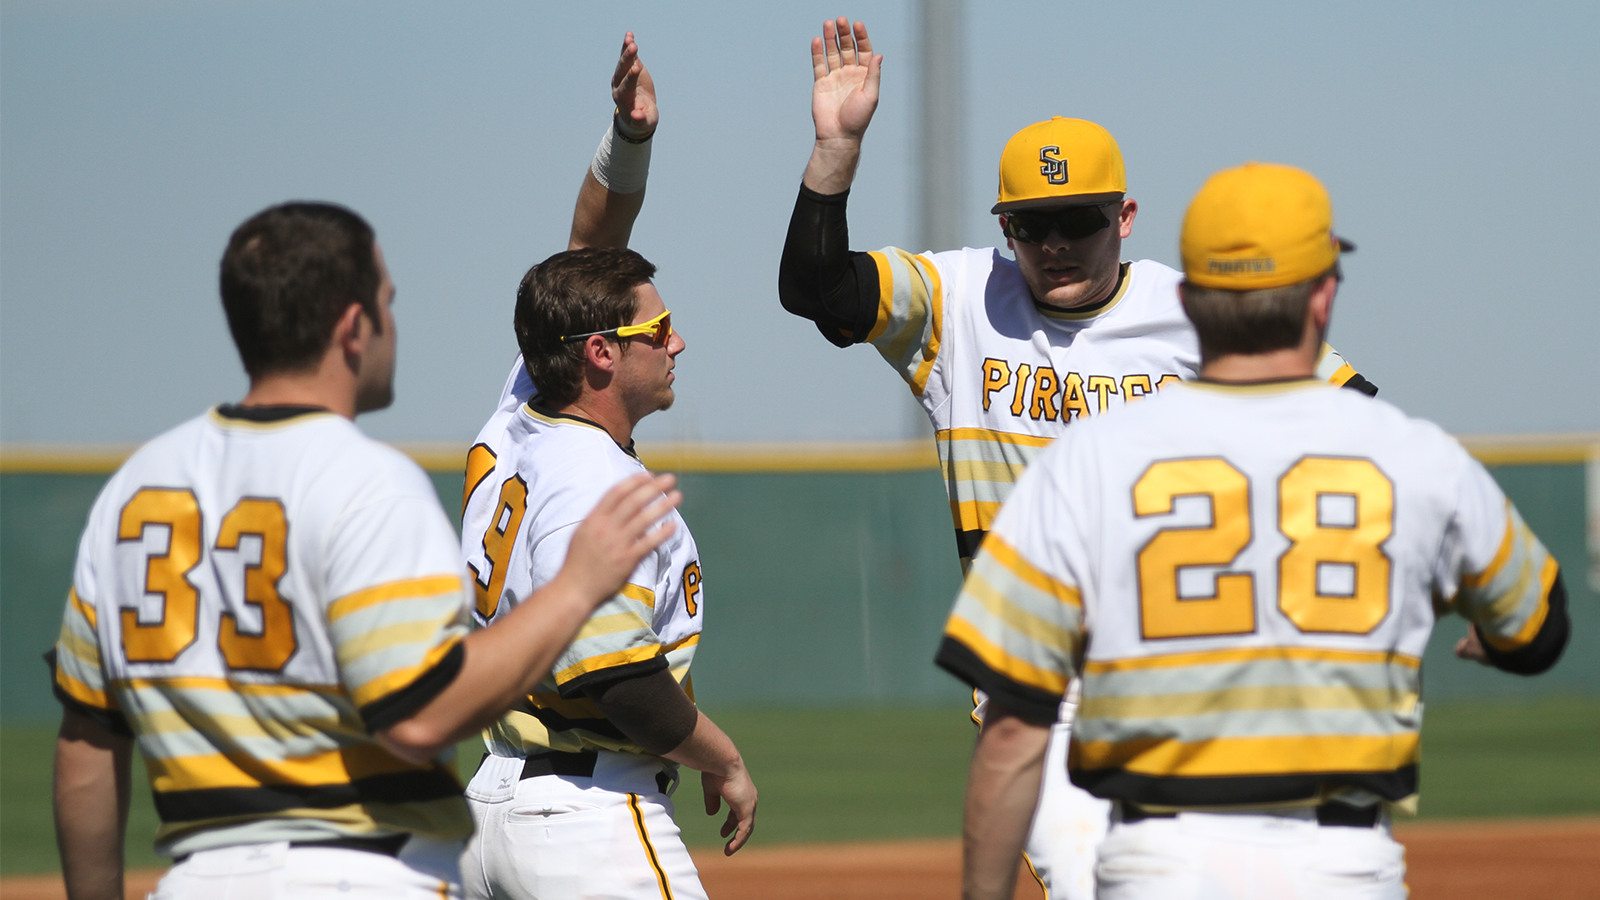 Baseball completes sweep of Blackburn with run-rule victories on Saturday